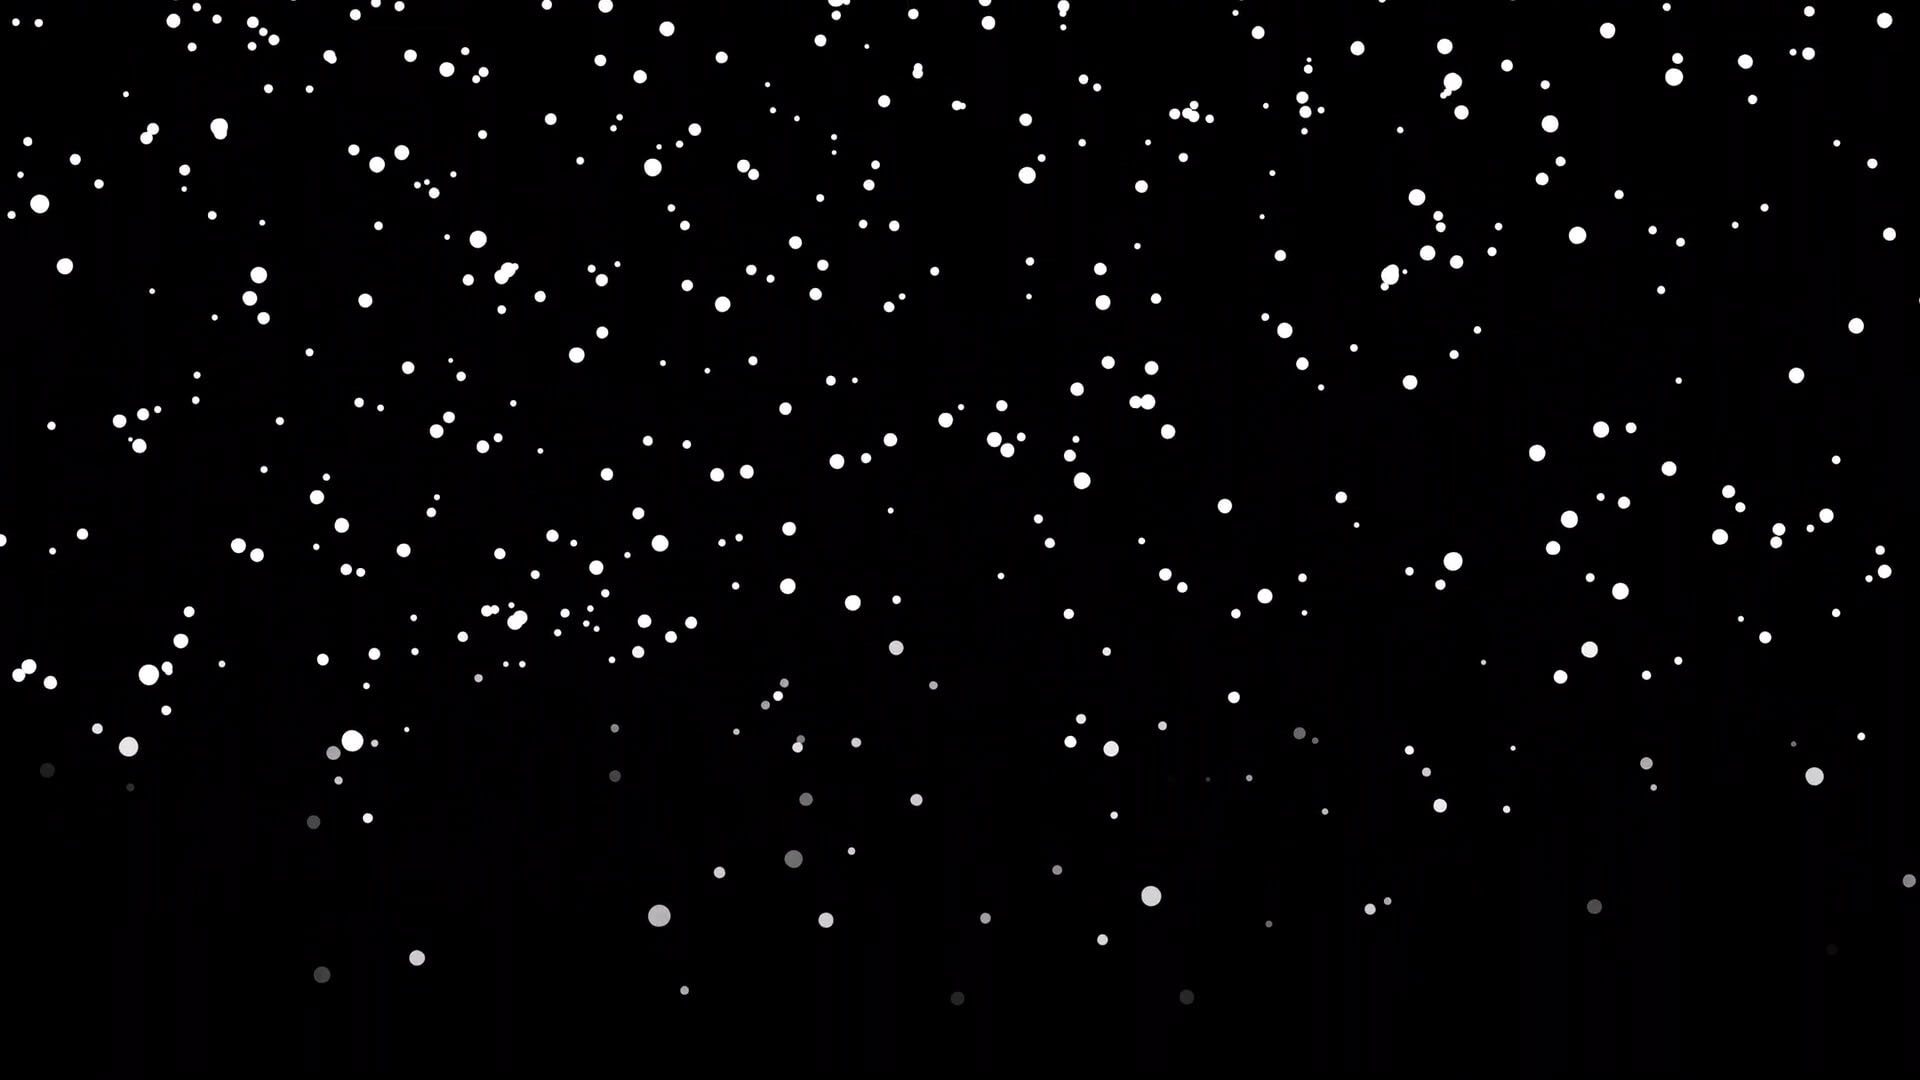 Free snow overlay 461378045 from Adobe Stock.